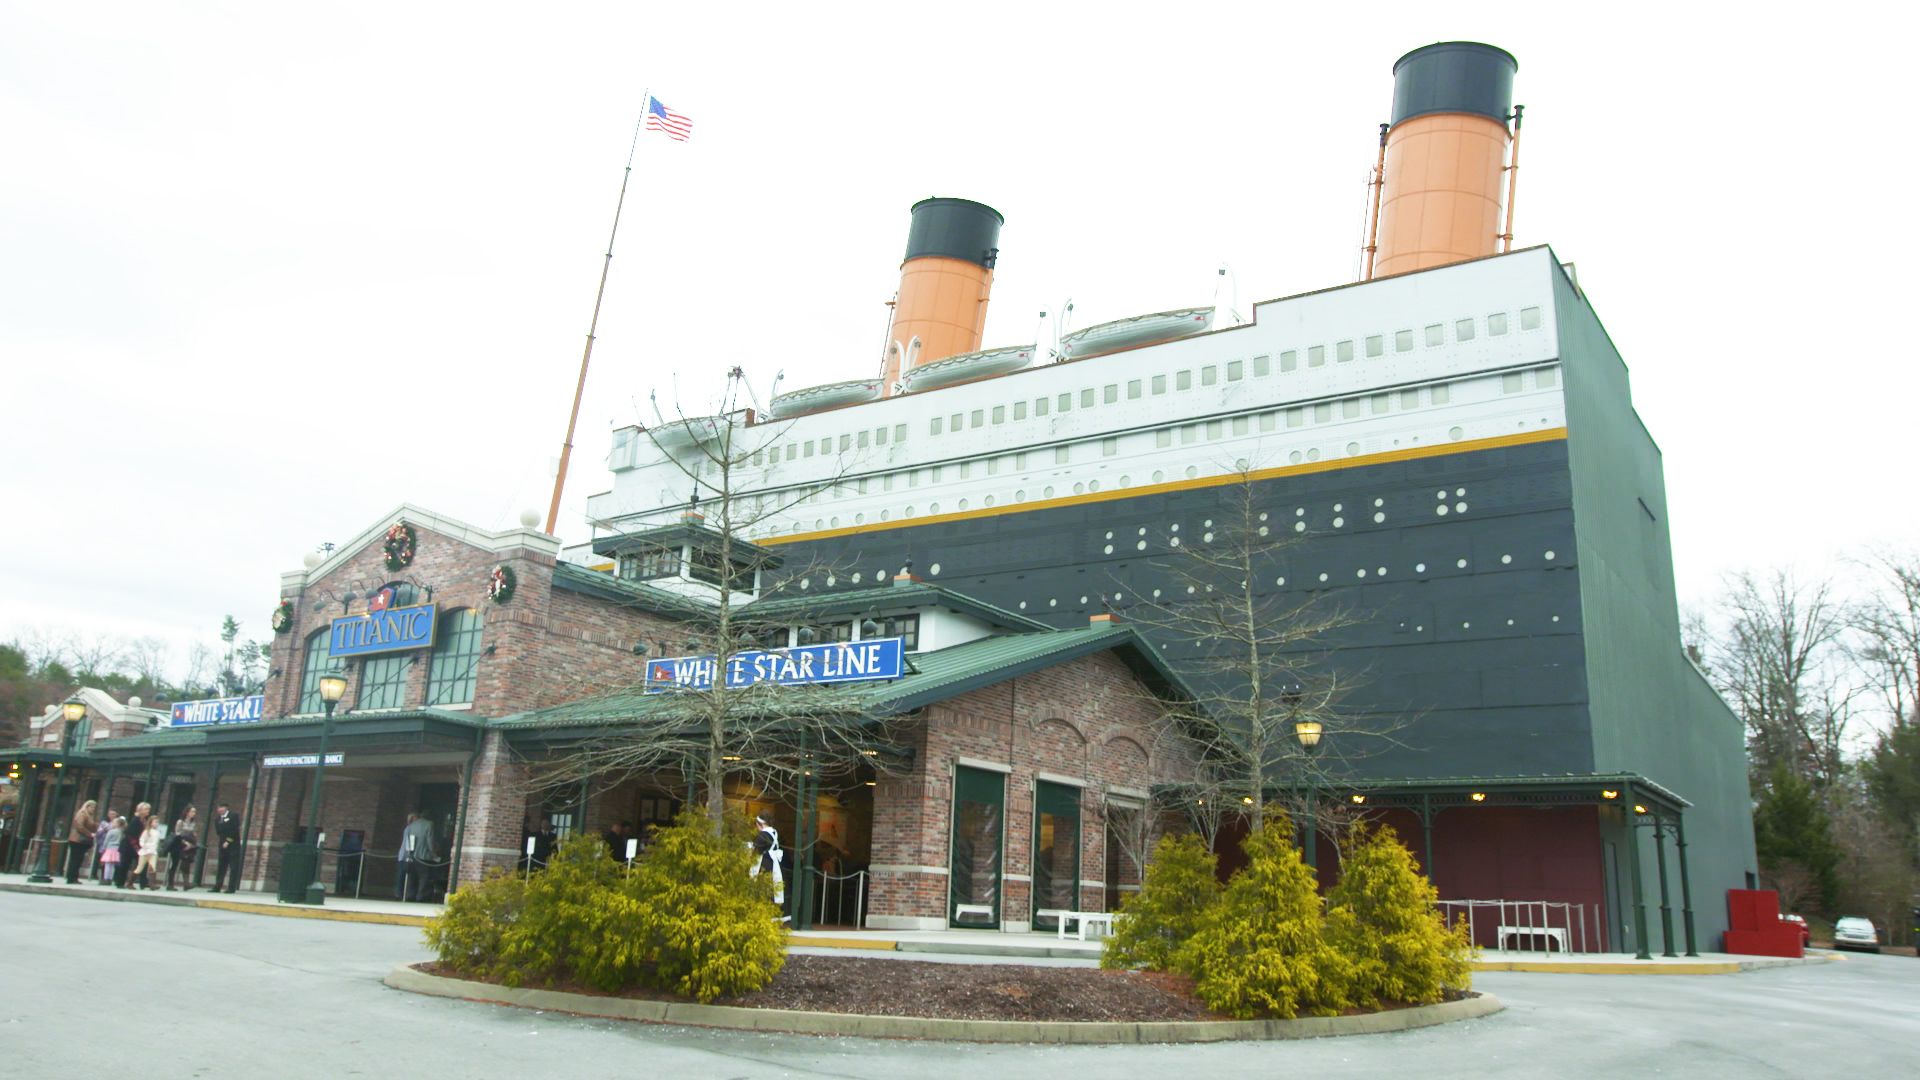 Titanic movie costumes at Titanic Museum Attraction in Pigeon Forge